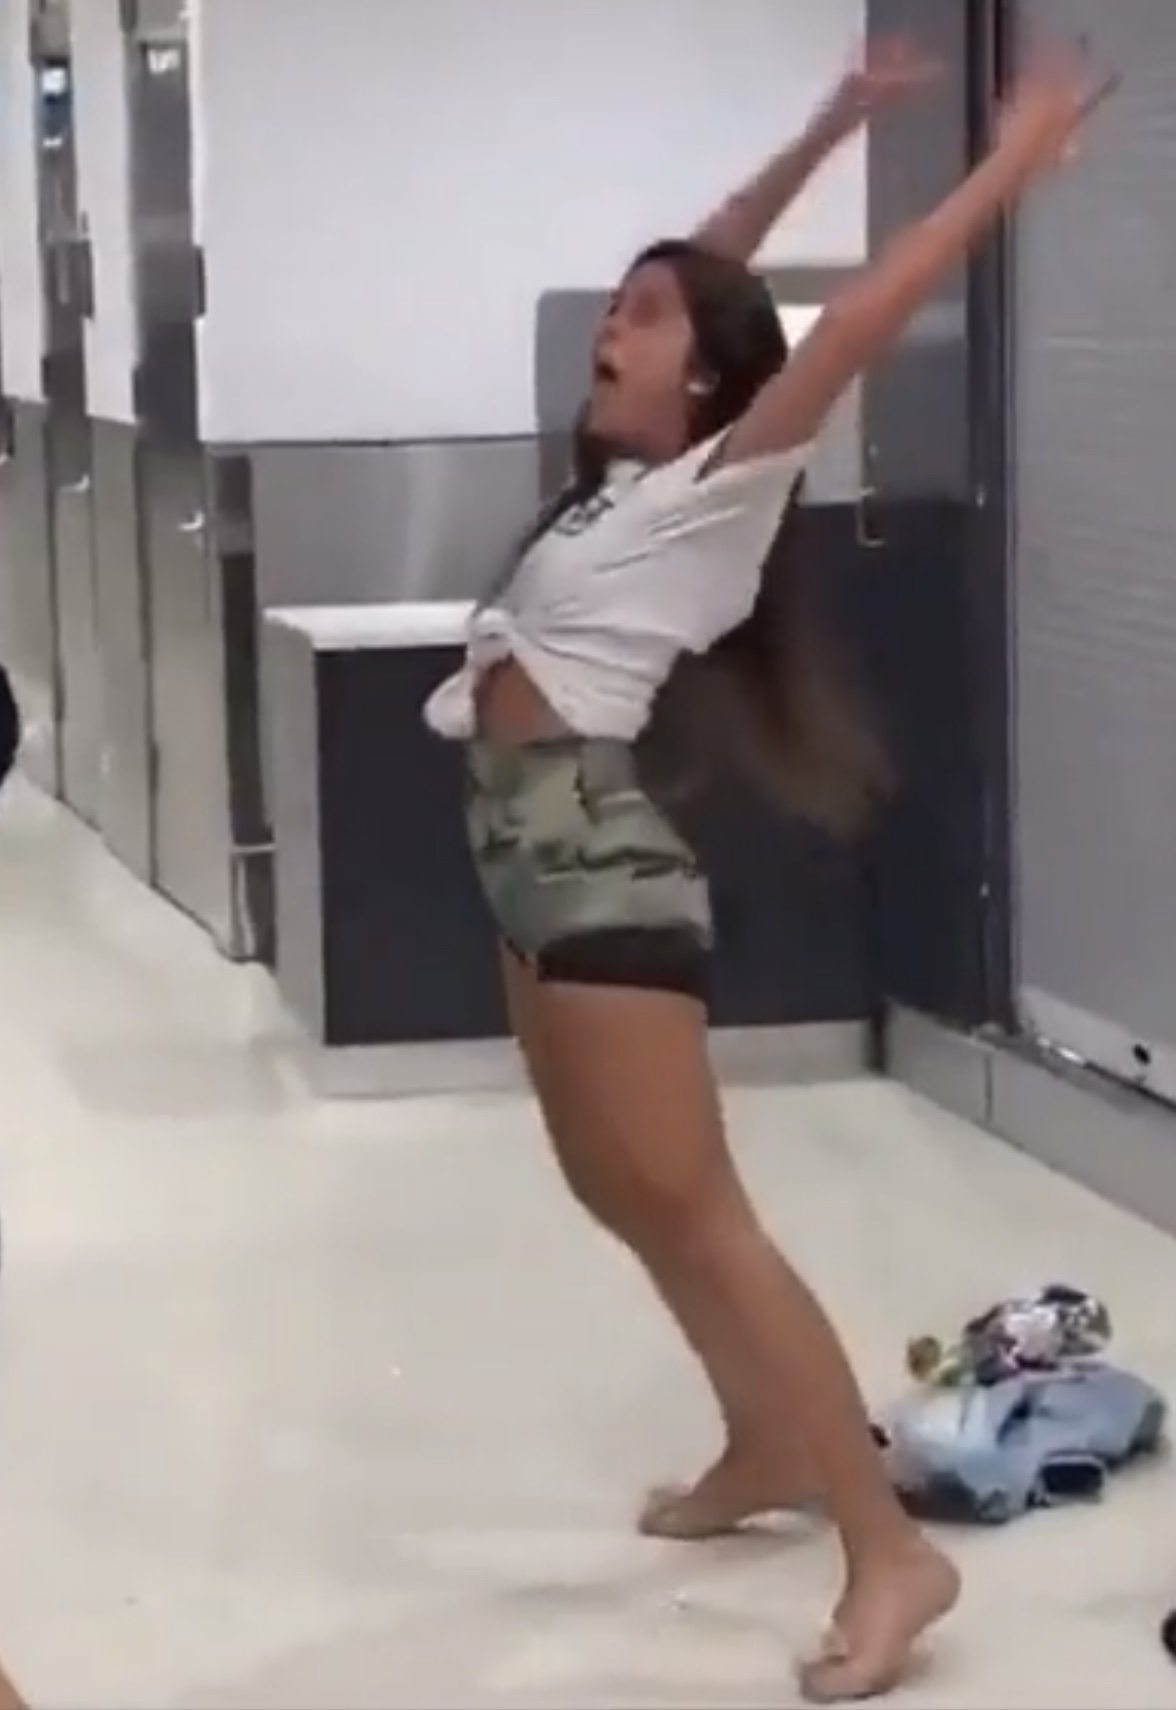 a girl in a white shirt and shorts jumping in a bathroom